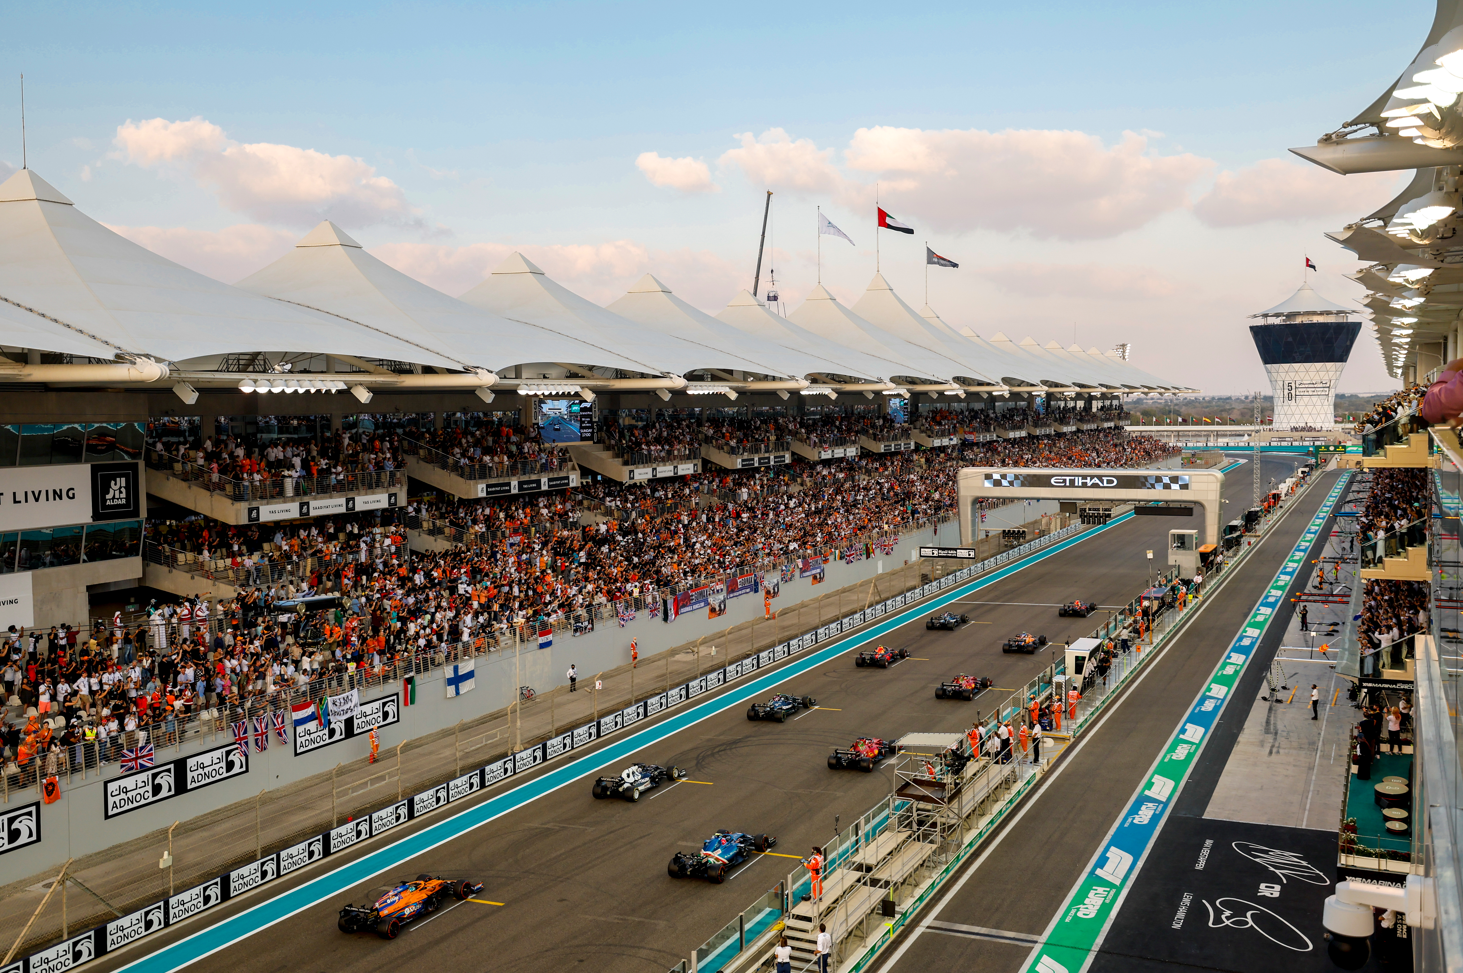 : Abu Dhabi Motorsports Management launched new products for the 14th edition of the FORMULA 1 ETIHAD AIRWAYS ABU DHABI GRAND PRIX